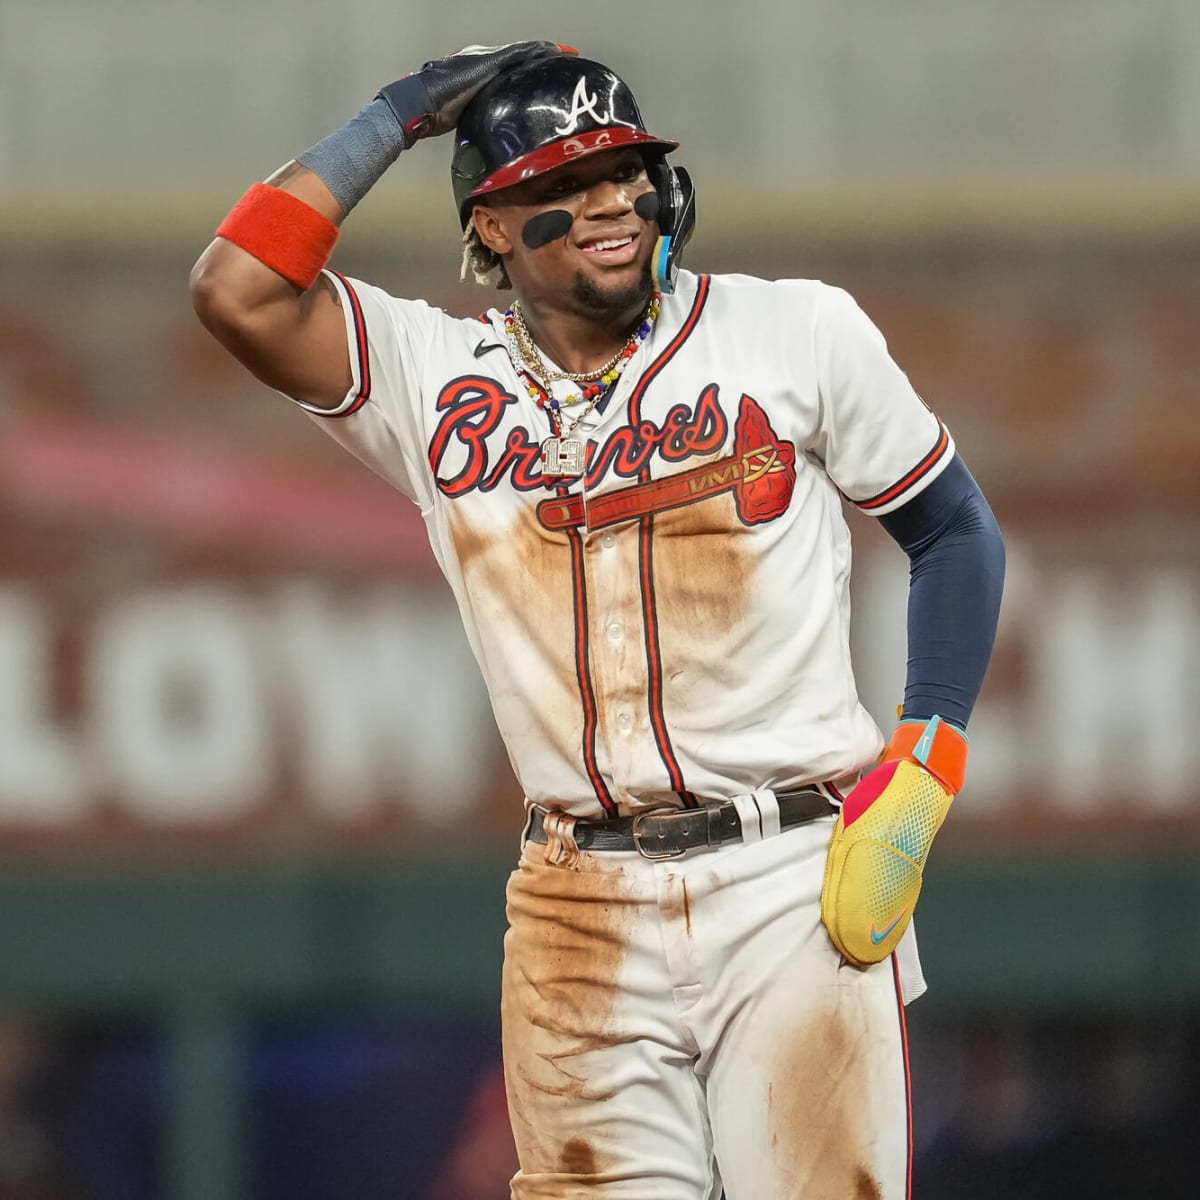 Historic Braves offense earns top MLB accolade